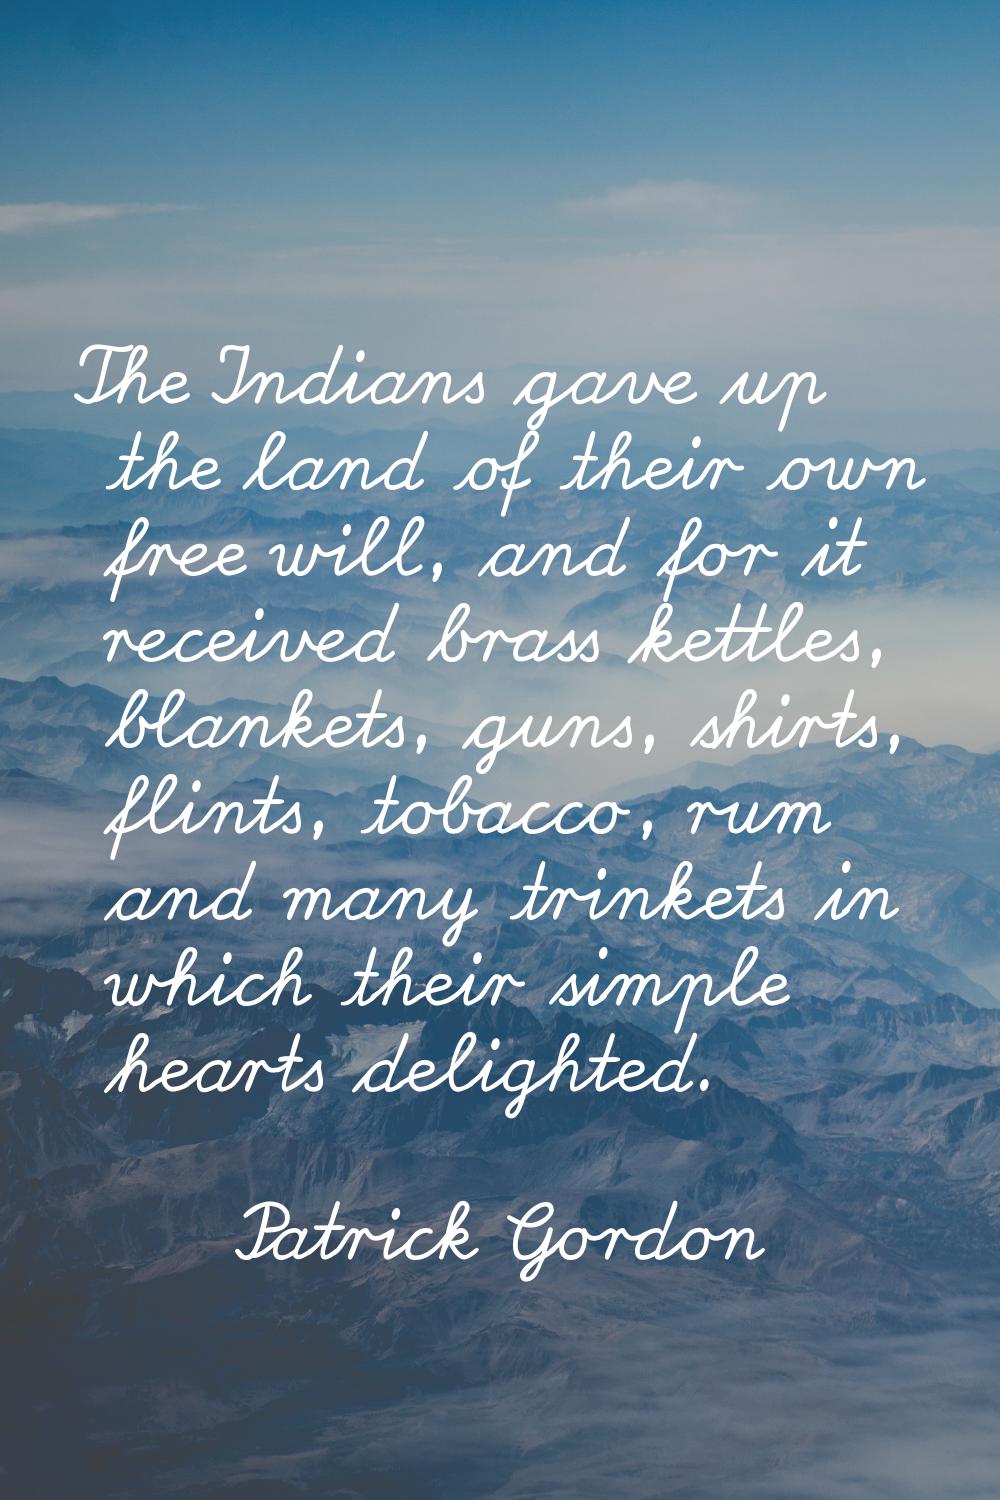 The Indians gave up the land of their own free will, and for it received brass kettles, blankets, g